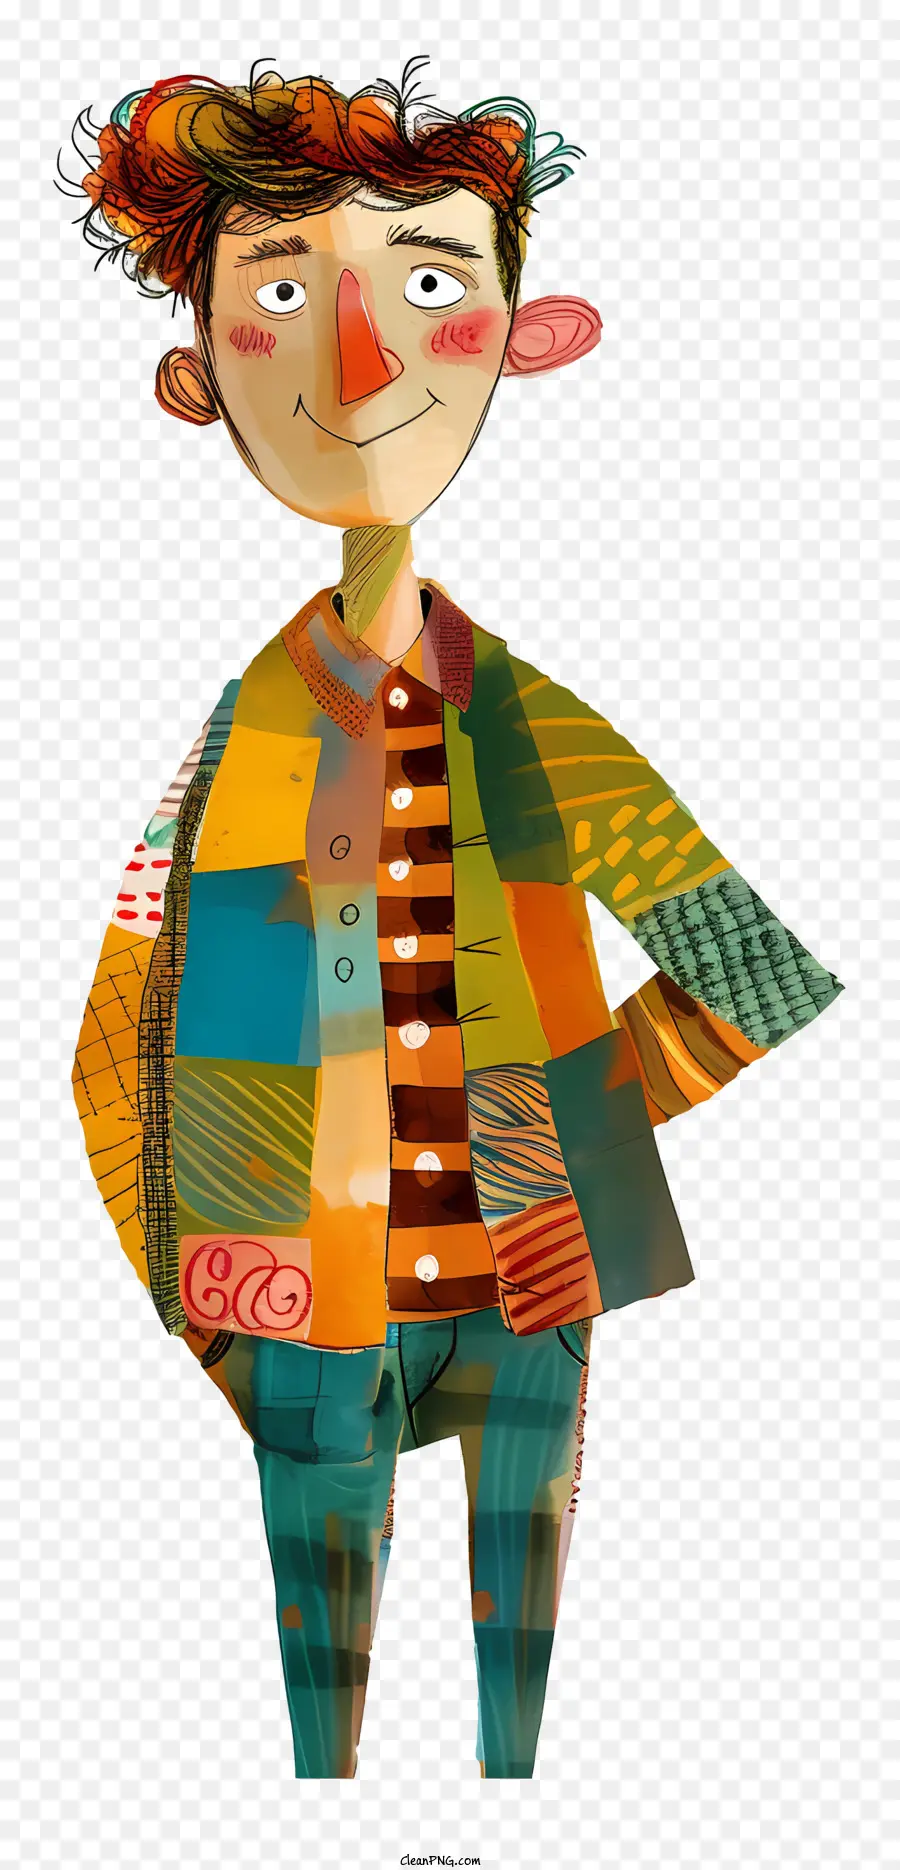 whimsical cartoon man colorful clothes dynamic design happy expression arms crossed